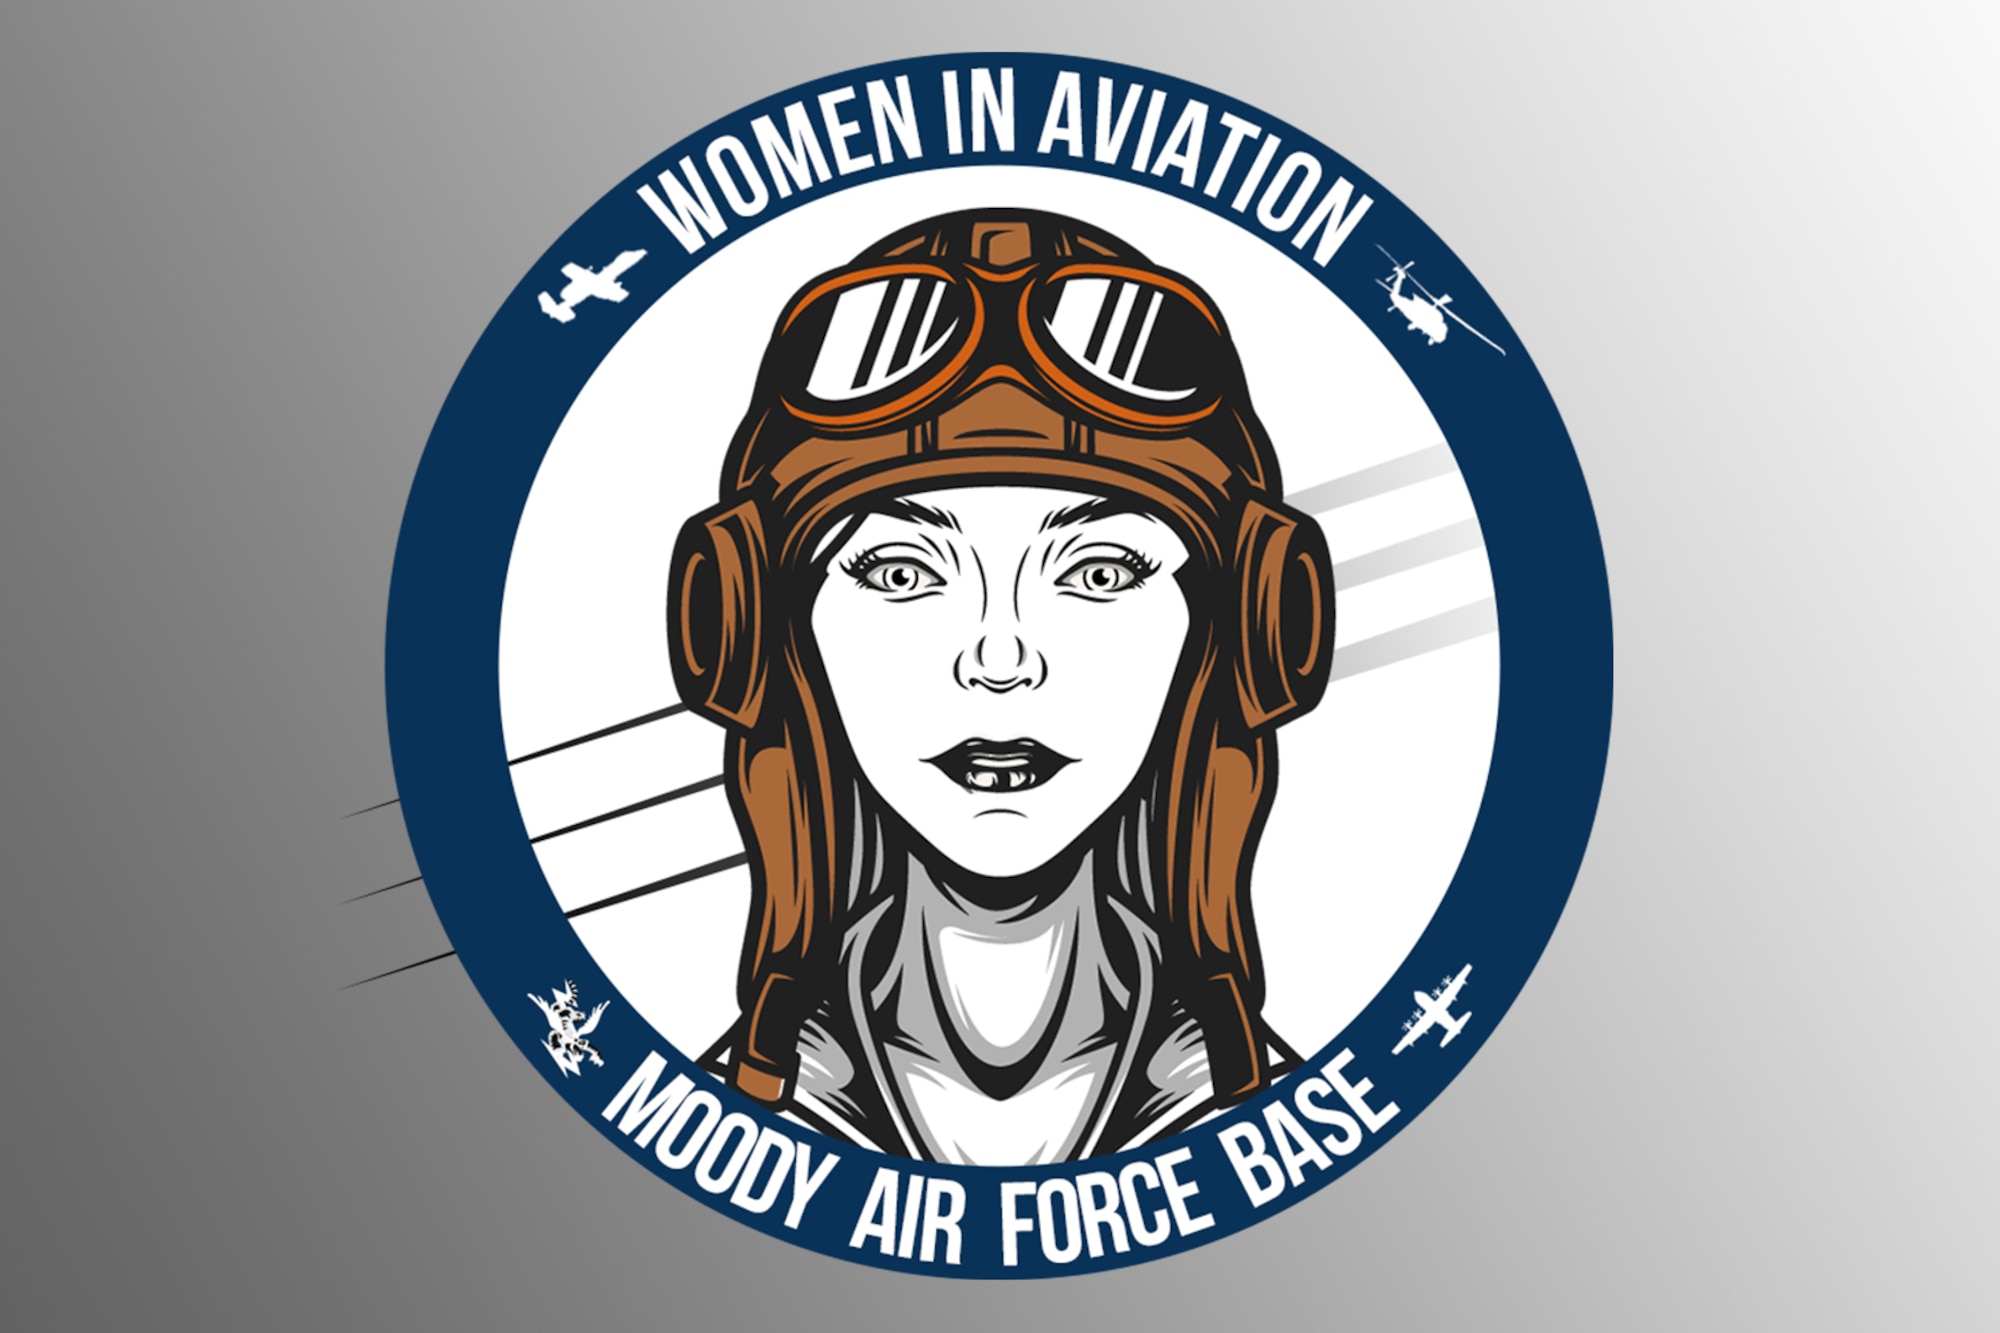 Women In Aviation Moody Air Force Base